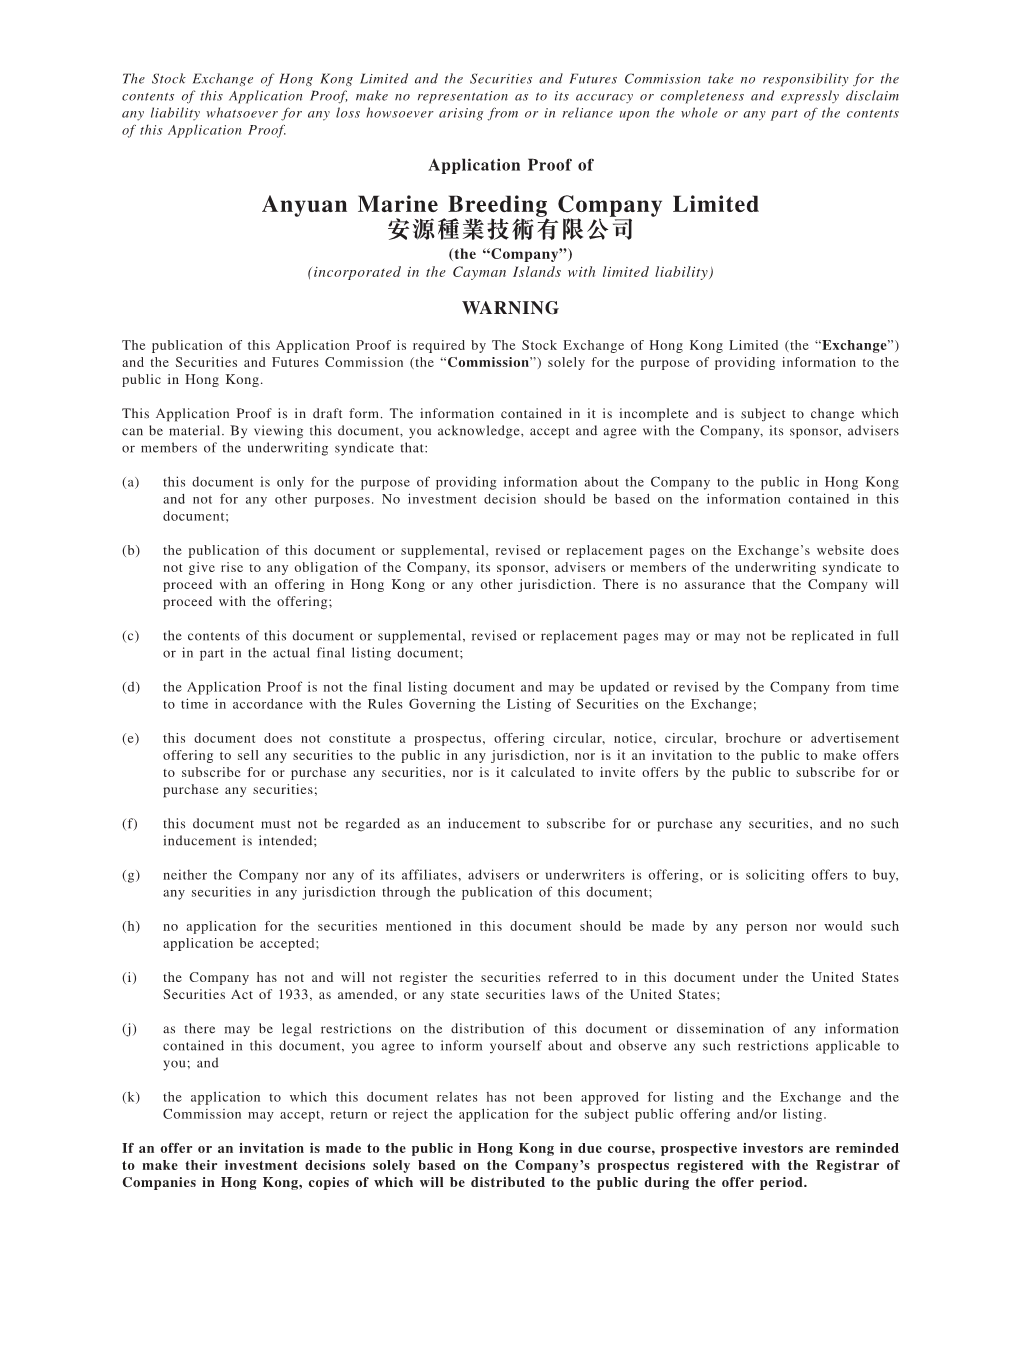 Anyuan Marine Breeding Company Limited 安源種業技術有限公司 (The “Company”) (Incorporated in the Cayman Islands with Limited Liability)